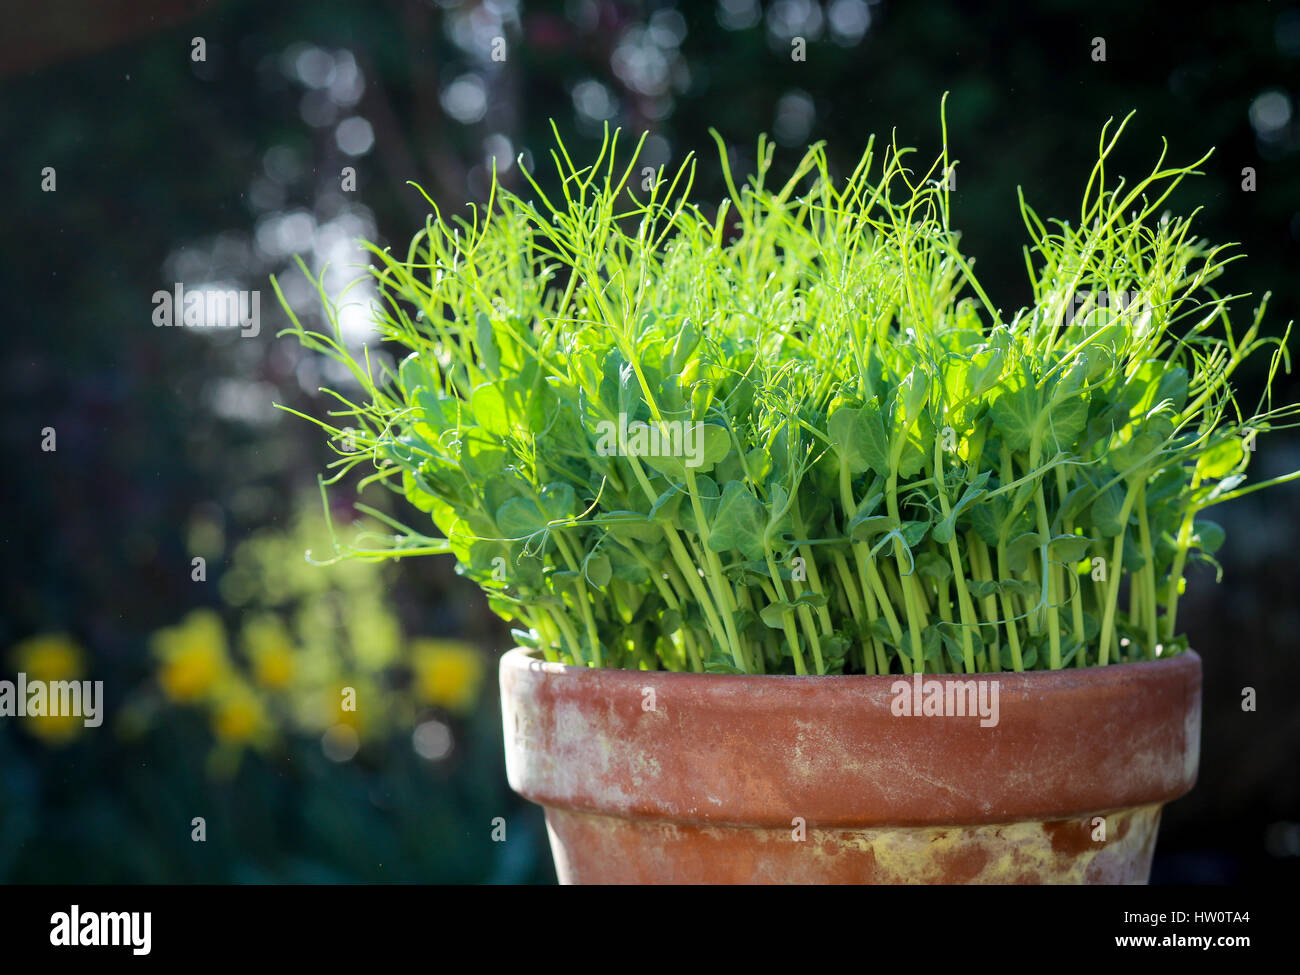 Pea green young tendril plants shoots microgreens, plant pot seedlings in sun light dark background Stock Photo